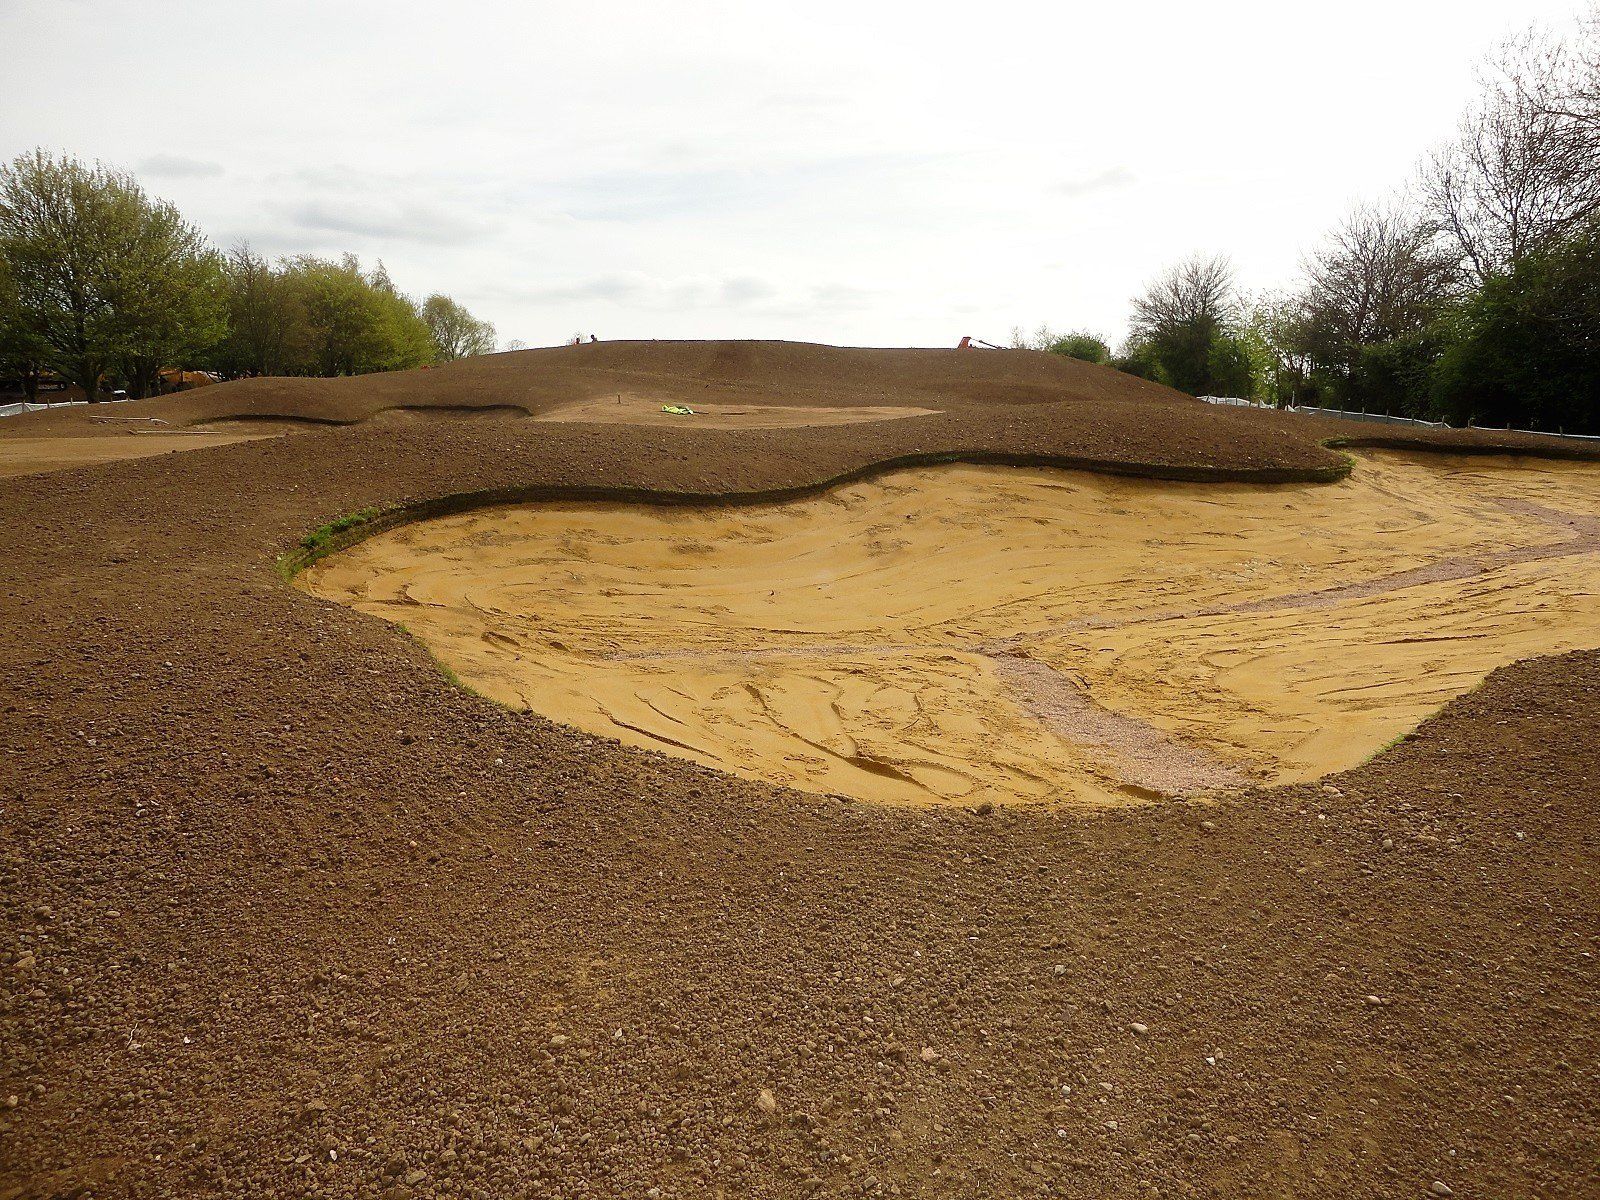 bunkers under construction